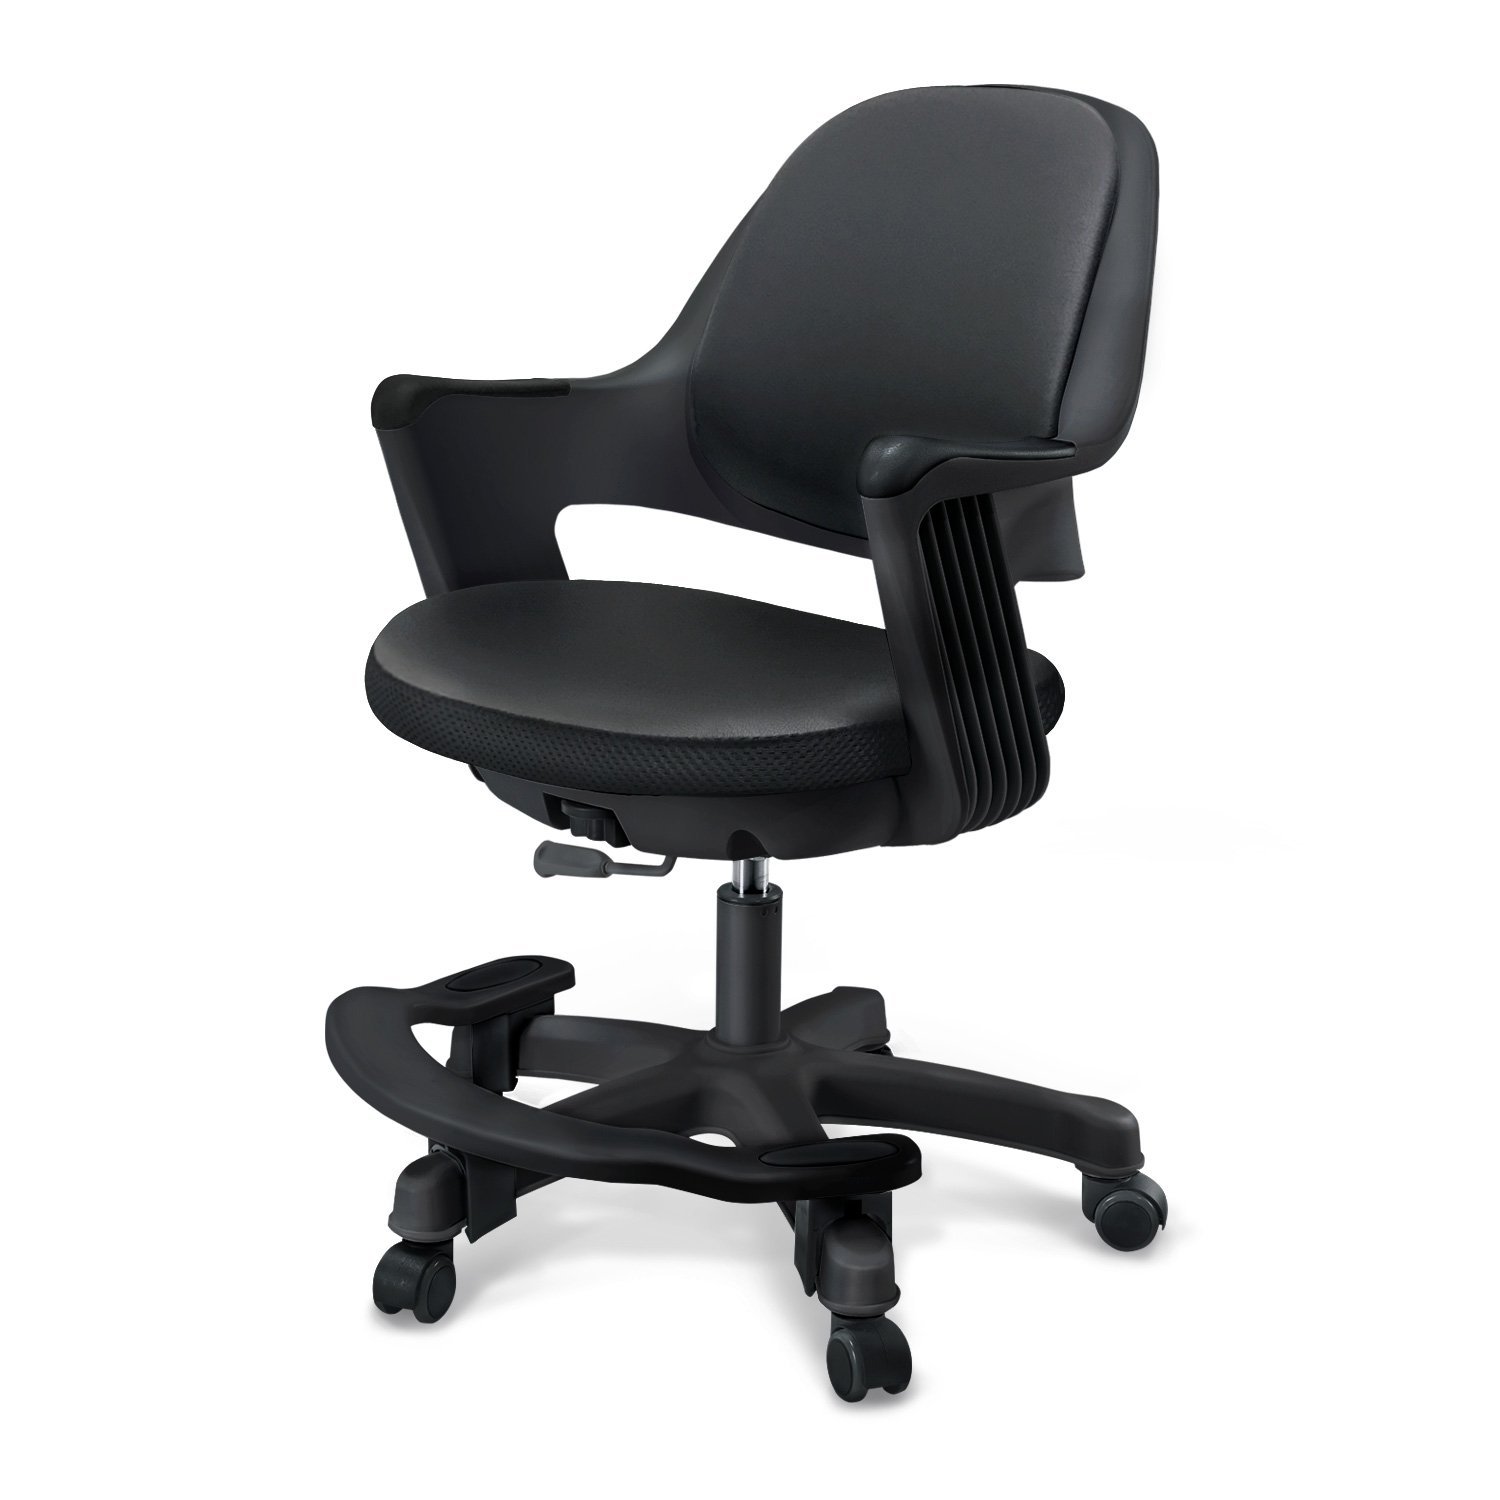 What Is The Best Office Chair For A Short Person